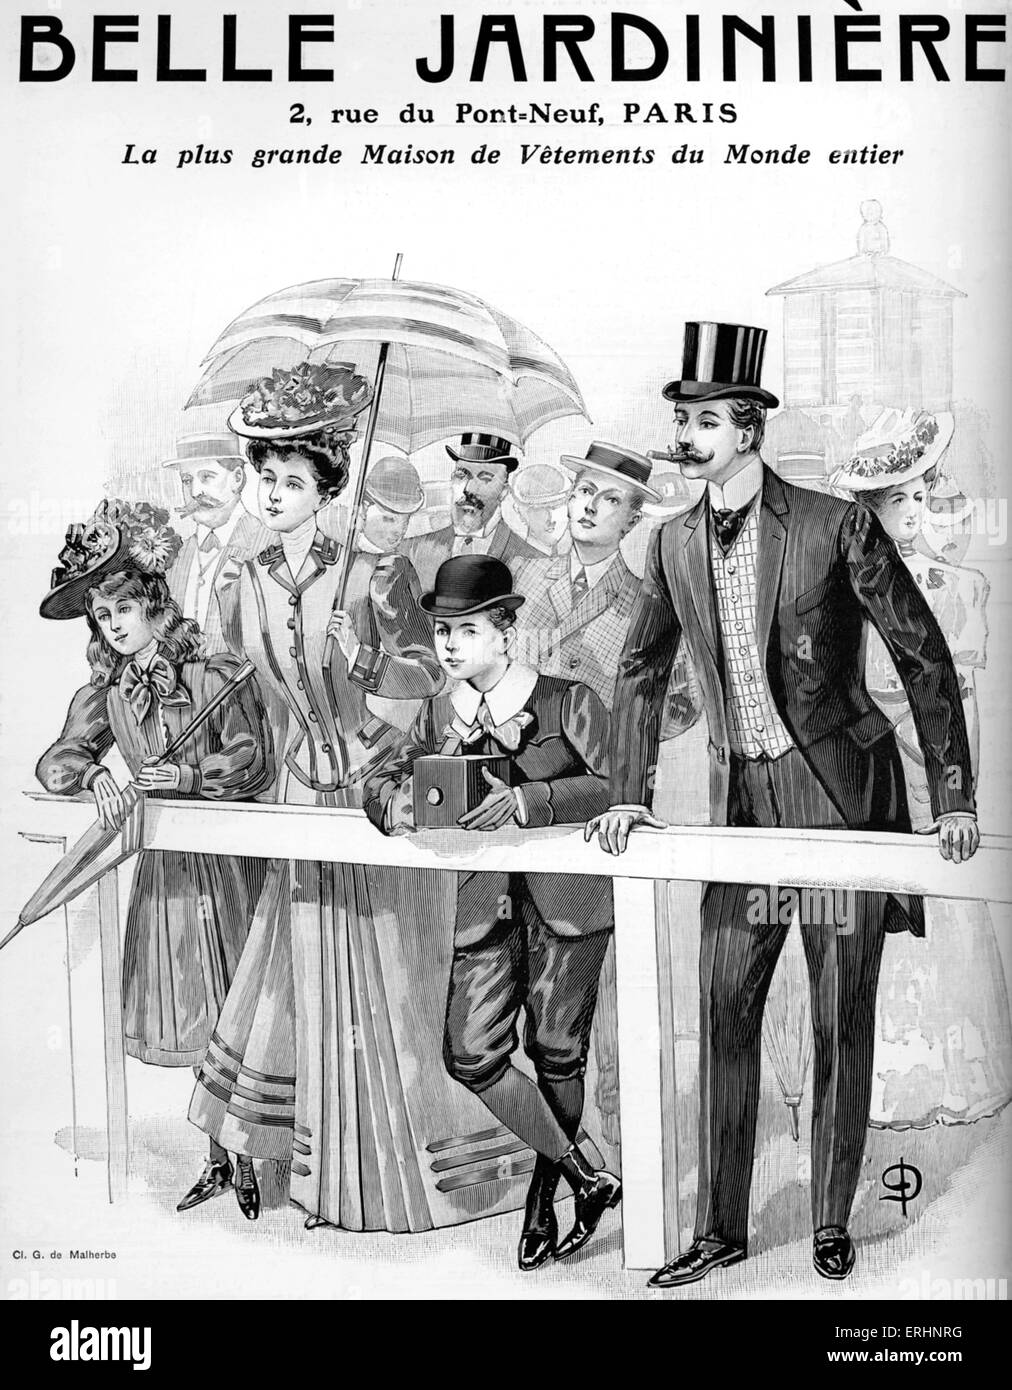 Fashion advert 1906 for a day at the races. Boy with box camera, with parents and sister.' Belle Jardiniere, modes d'ete'. Stock Photo